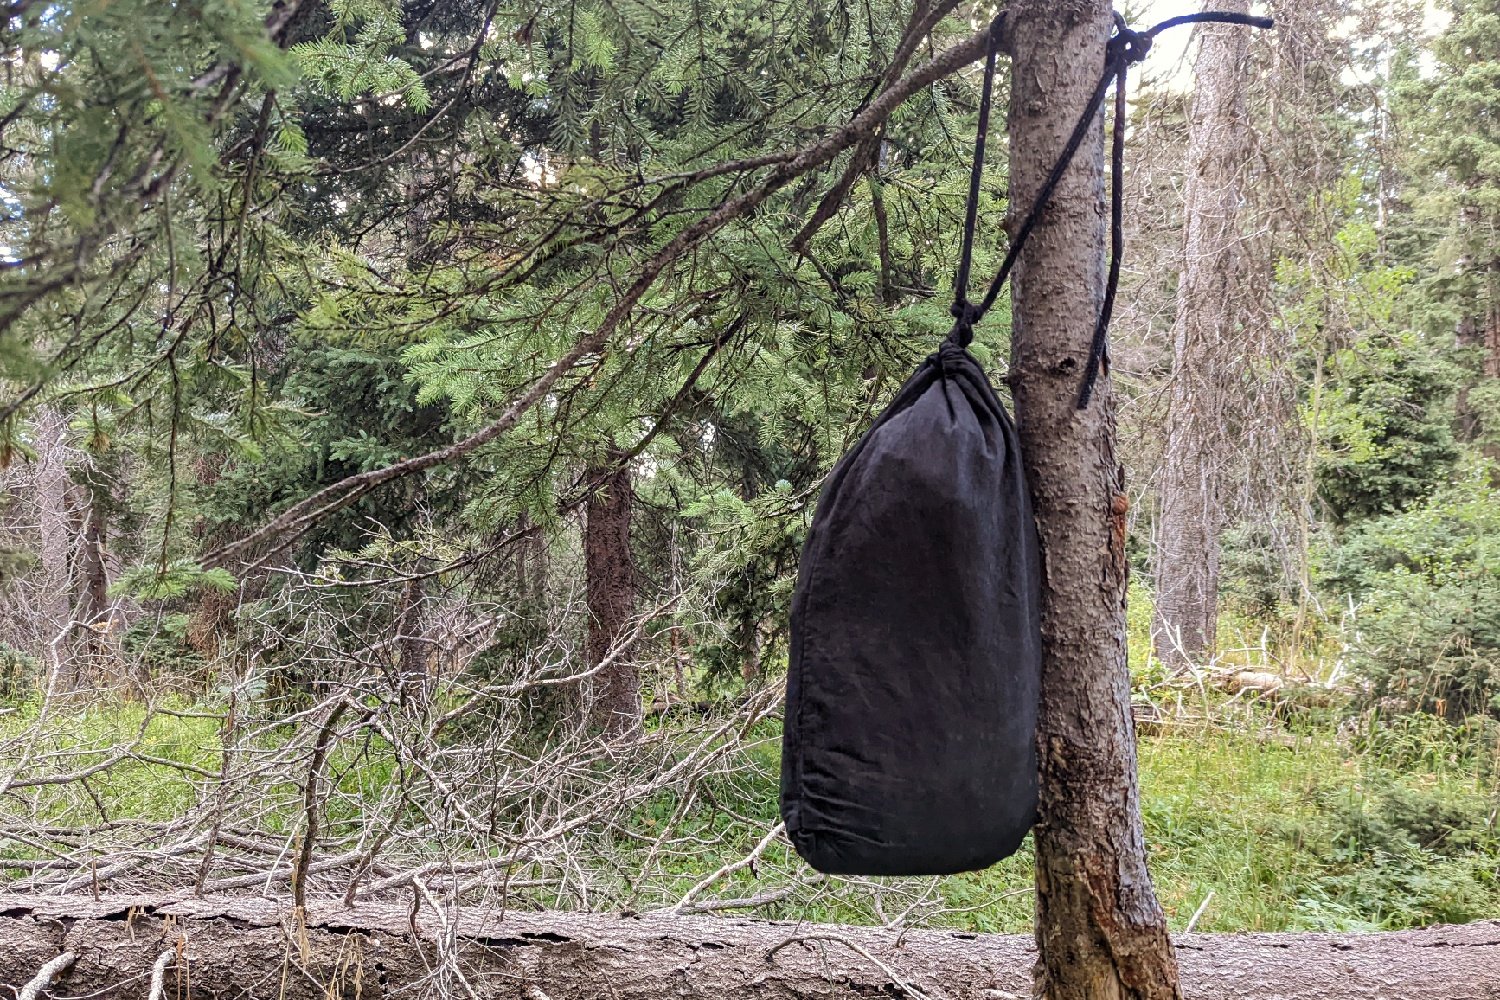 An Ursack Major tied to a tree